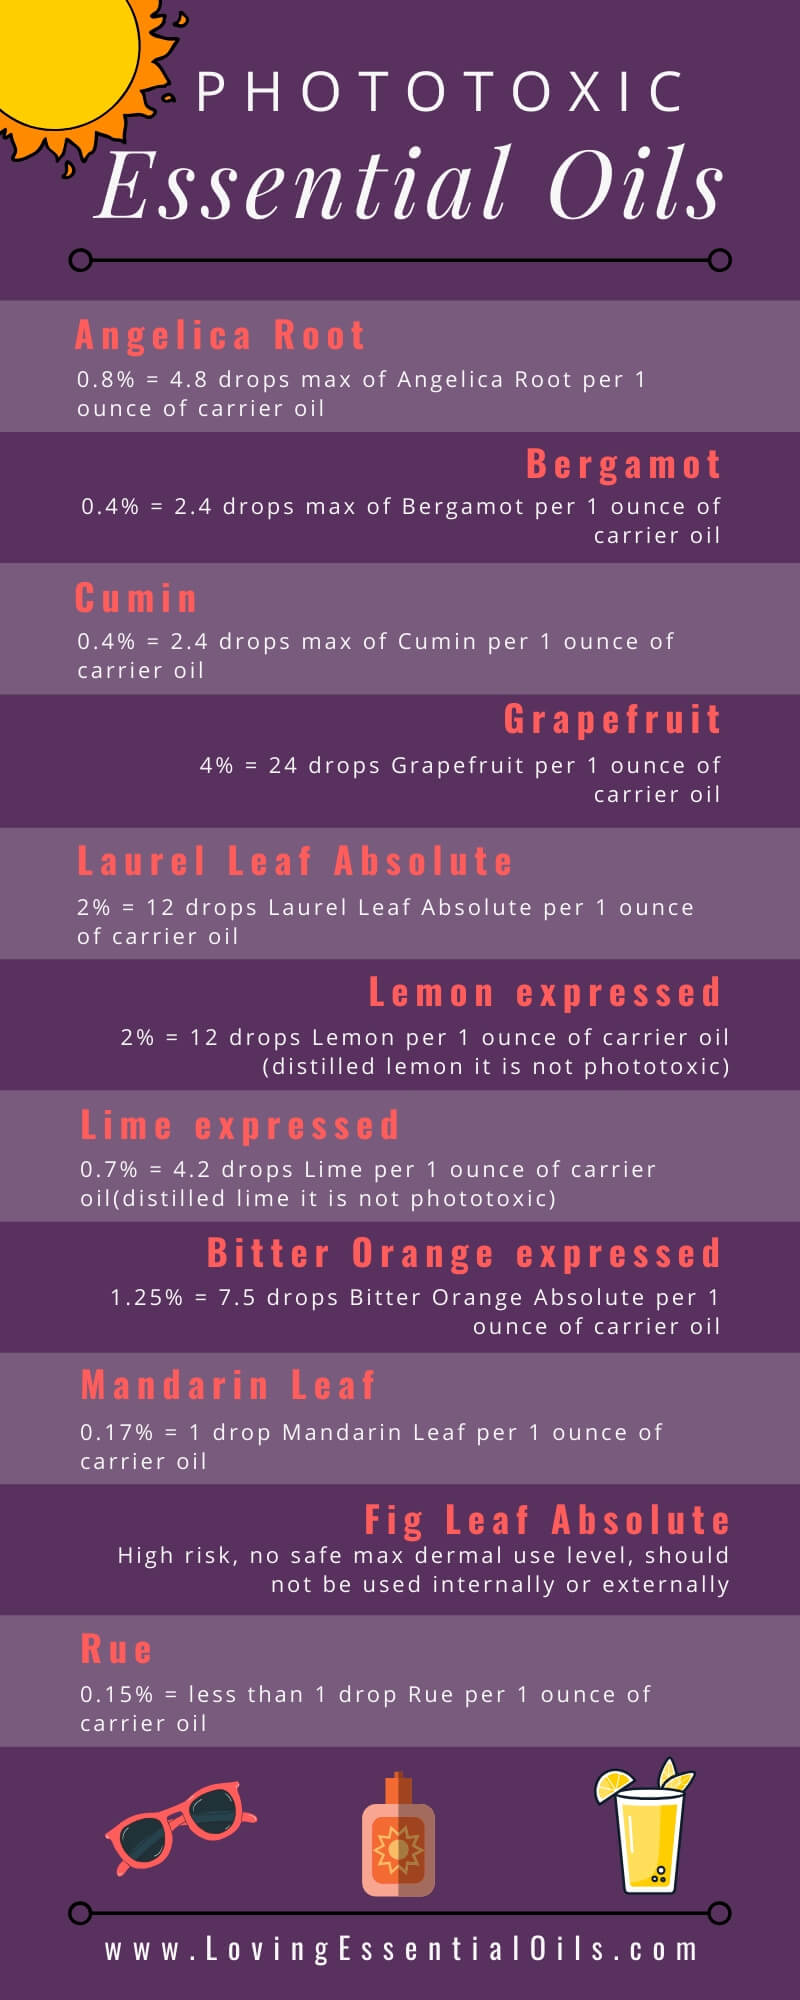 Phototoxic Essential Oils infographic by Loving Essential Oils - Learn how to safely use essential oils in the sun